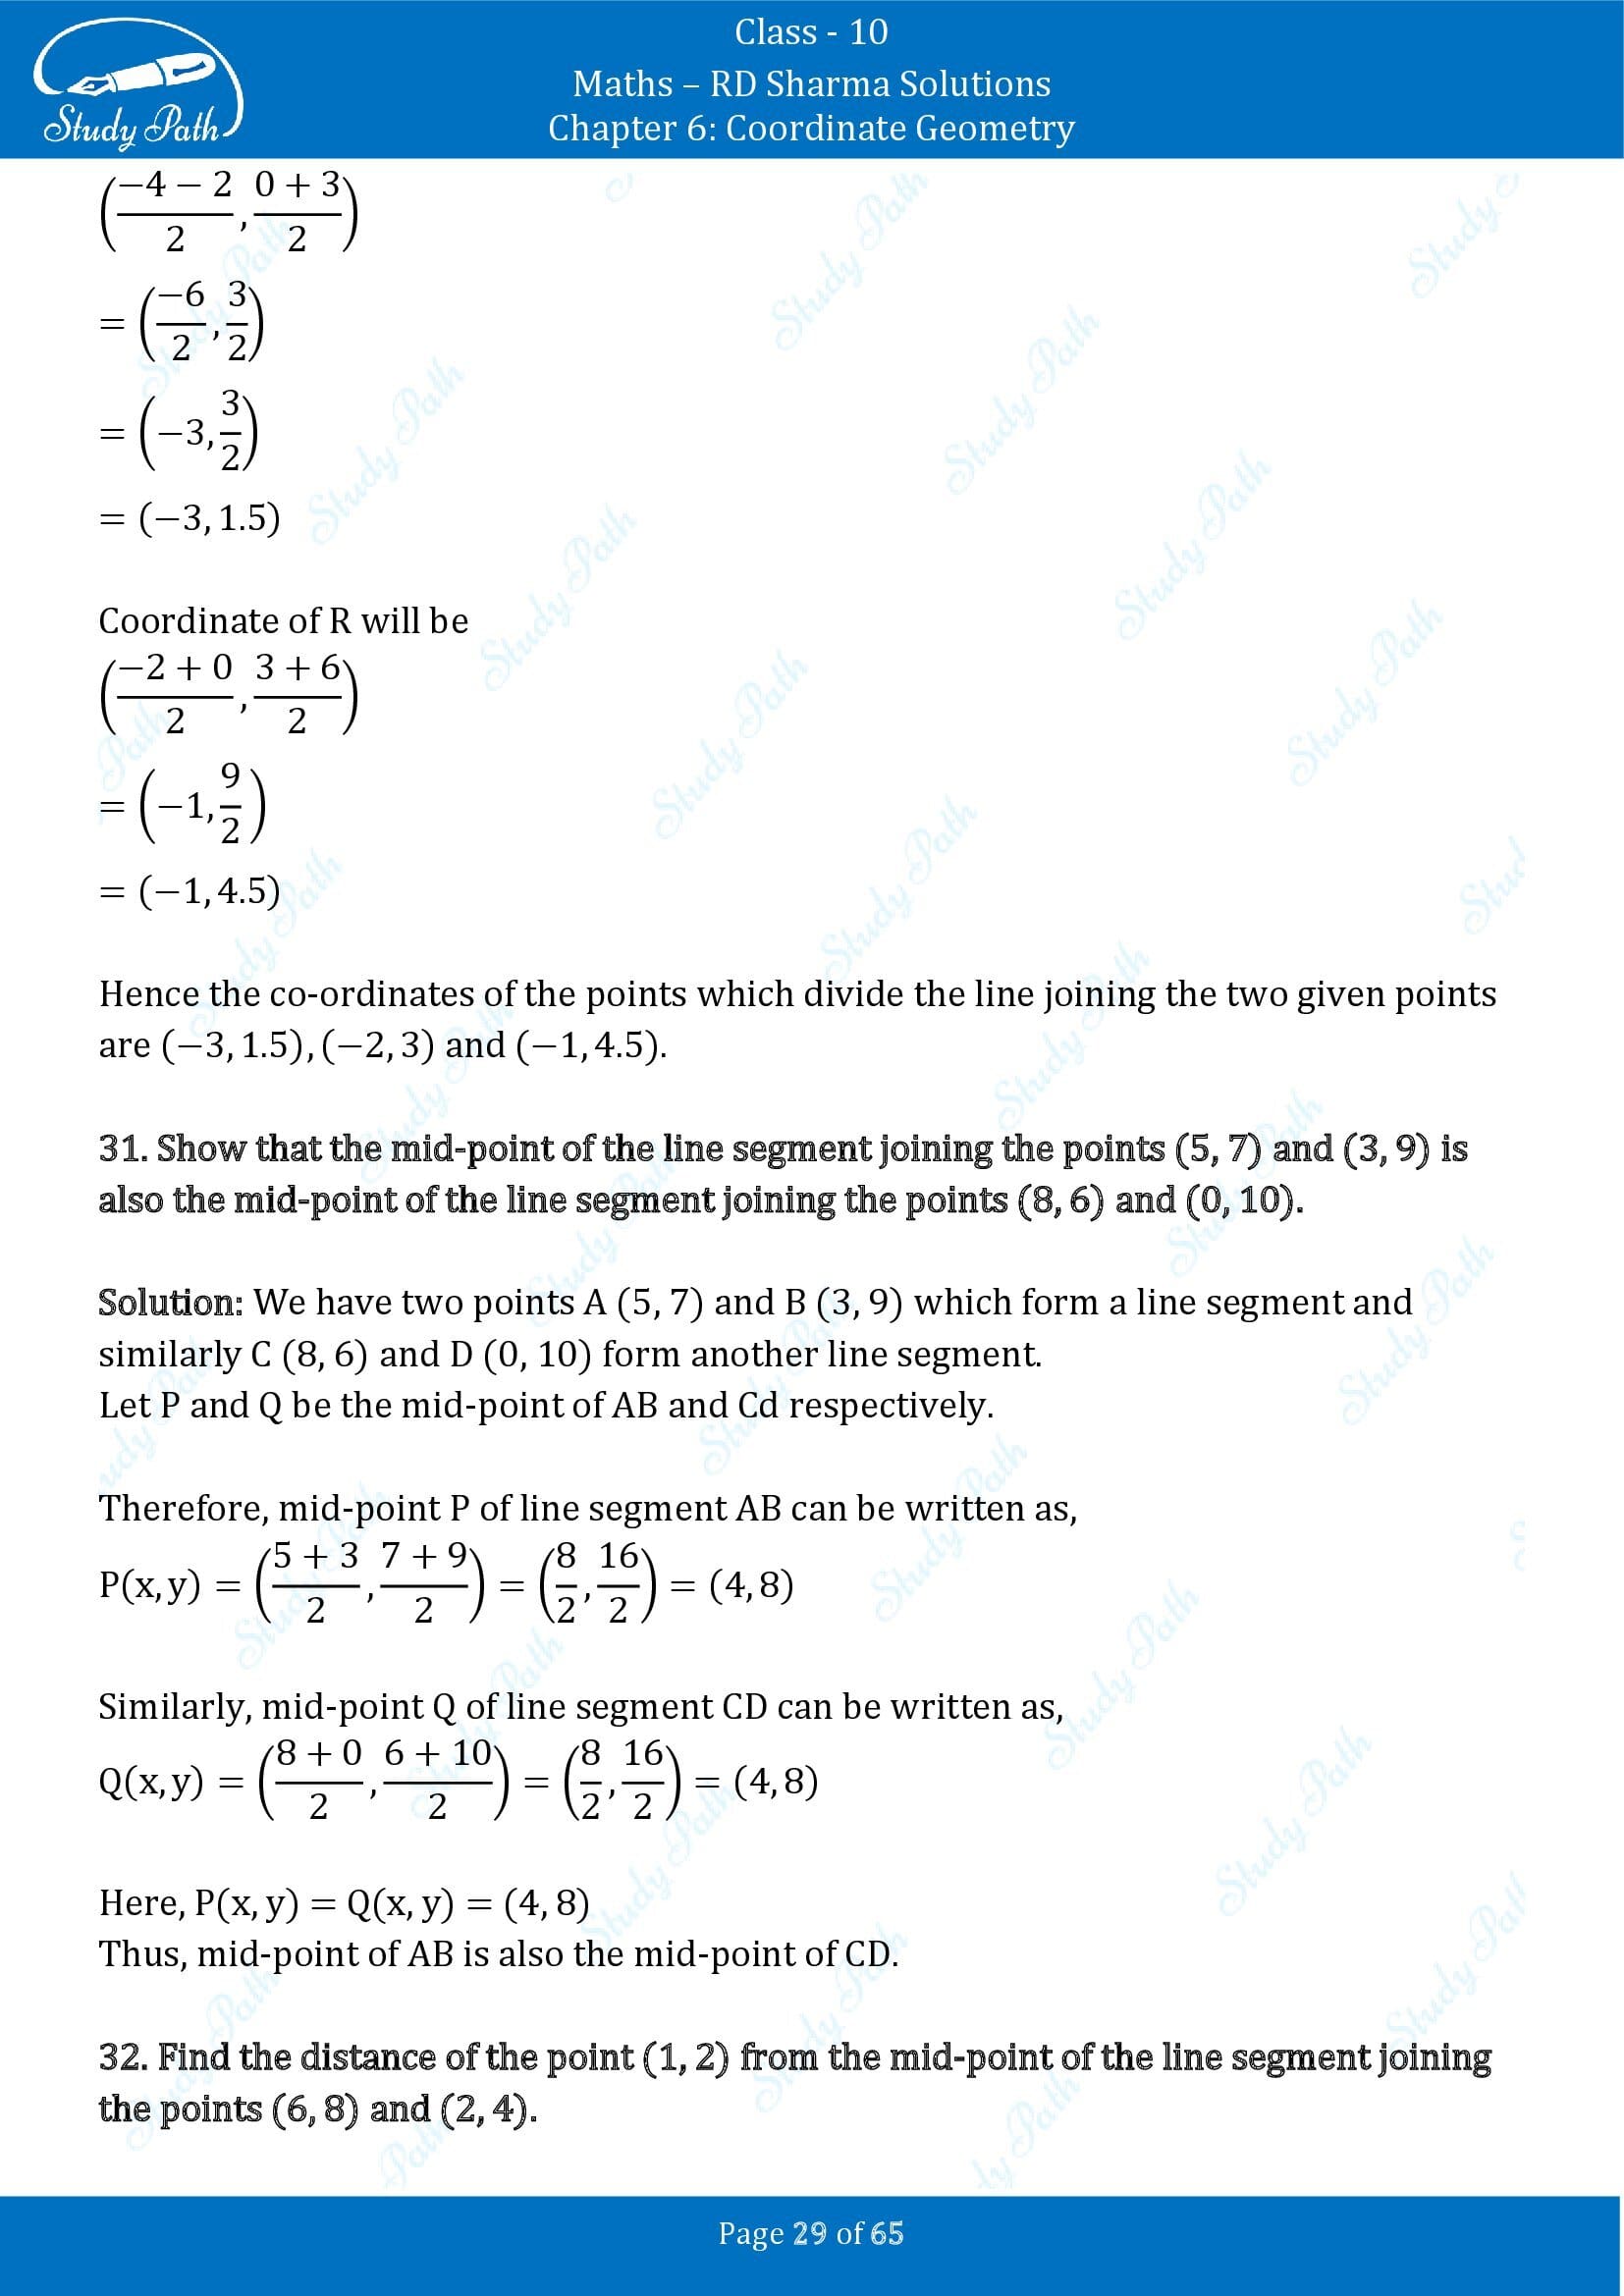 RD Sharma Solutions Class 10 Chapter 6 Coordinate Geometry Exercise 6.3 00029